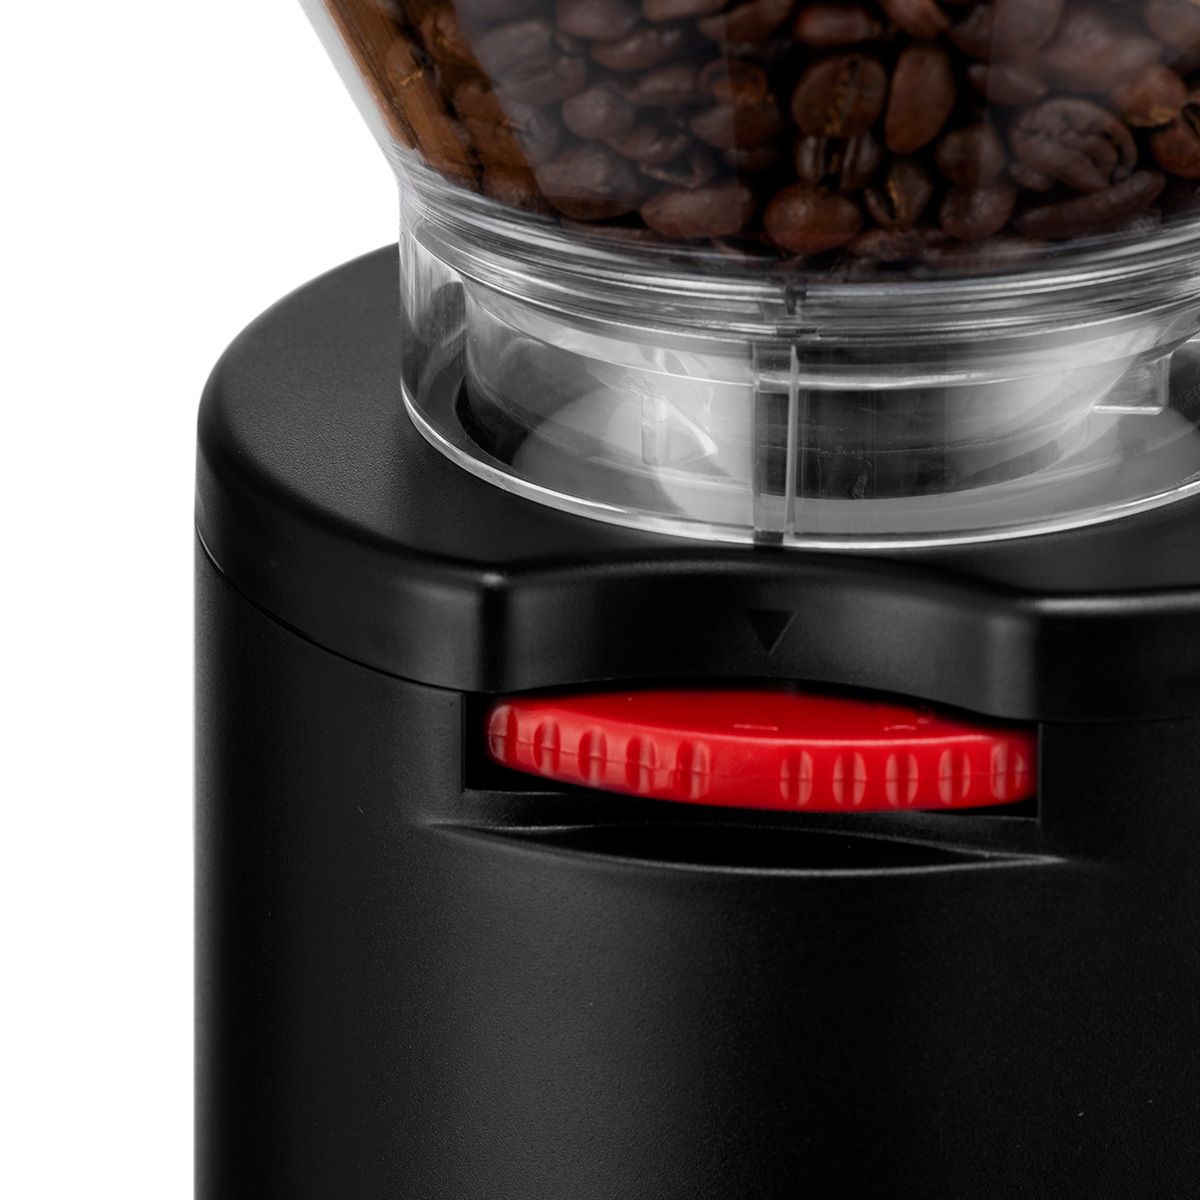 Details about   Bodum Bistro Electric Coffee Grinder-Black/Green-Made with Danish Excellence! 